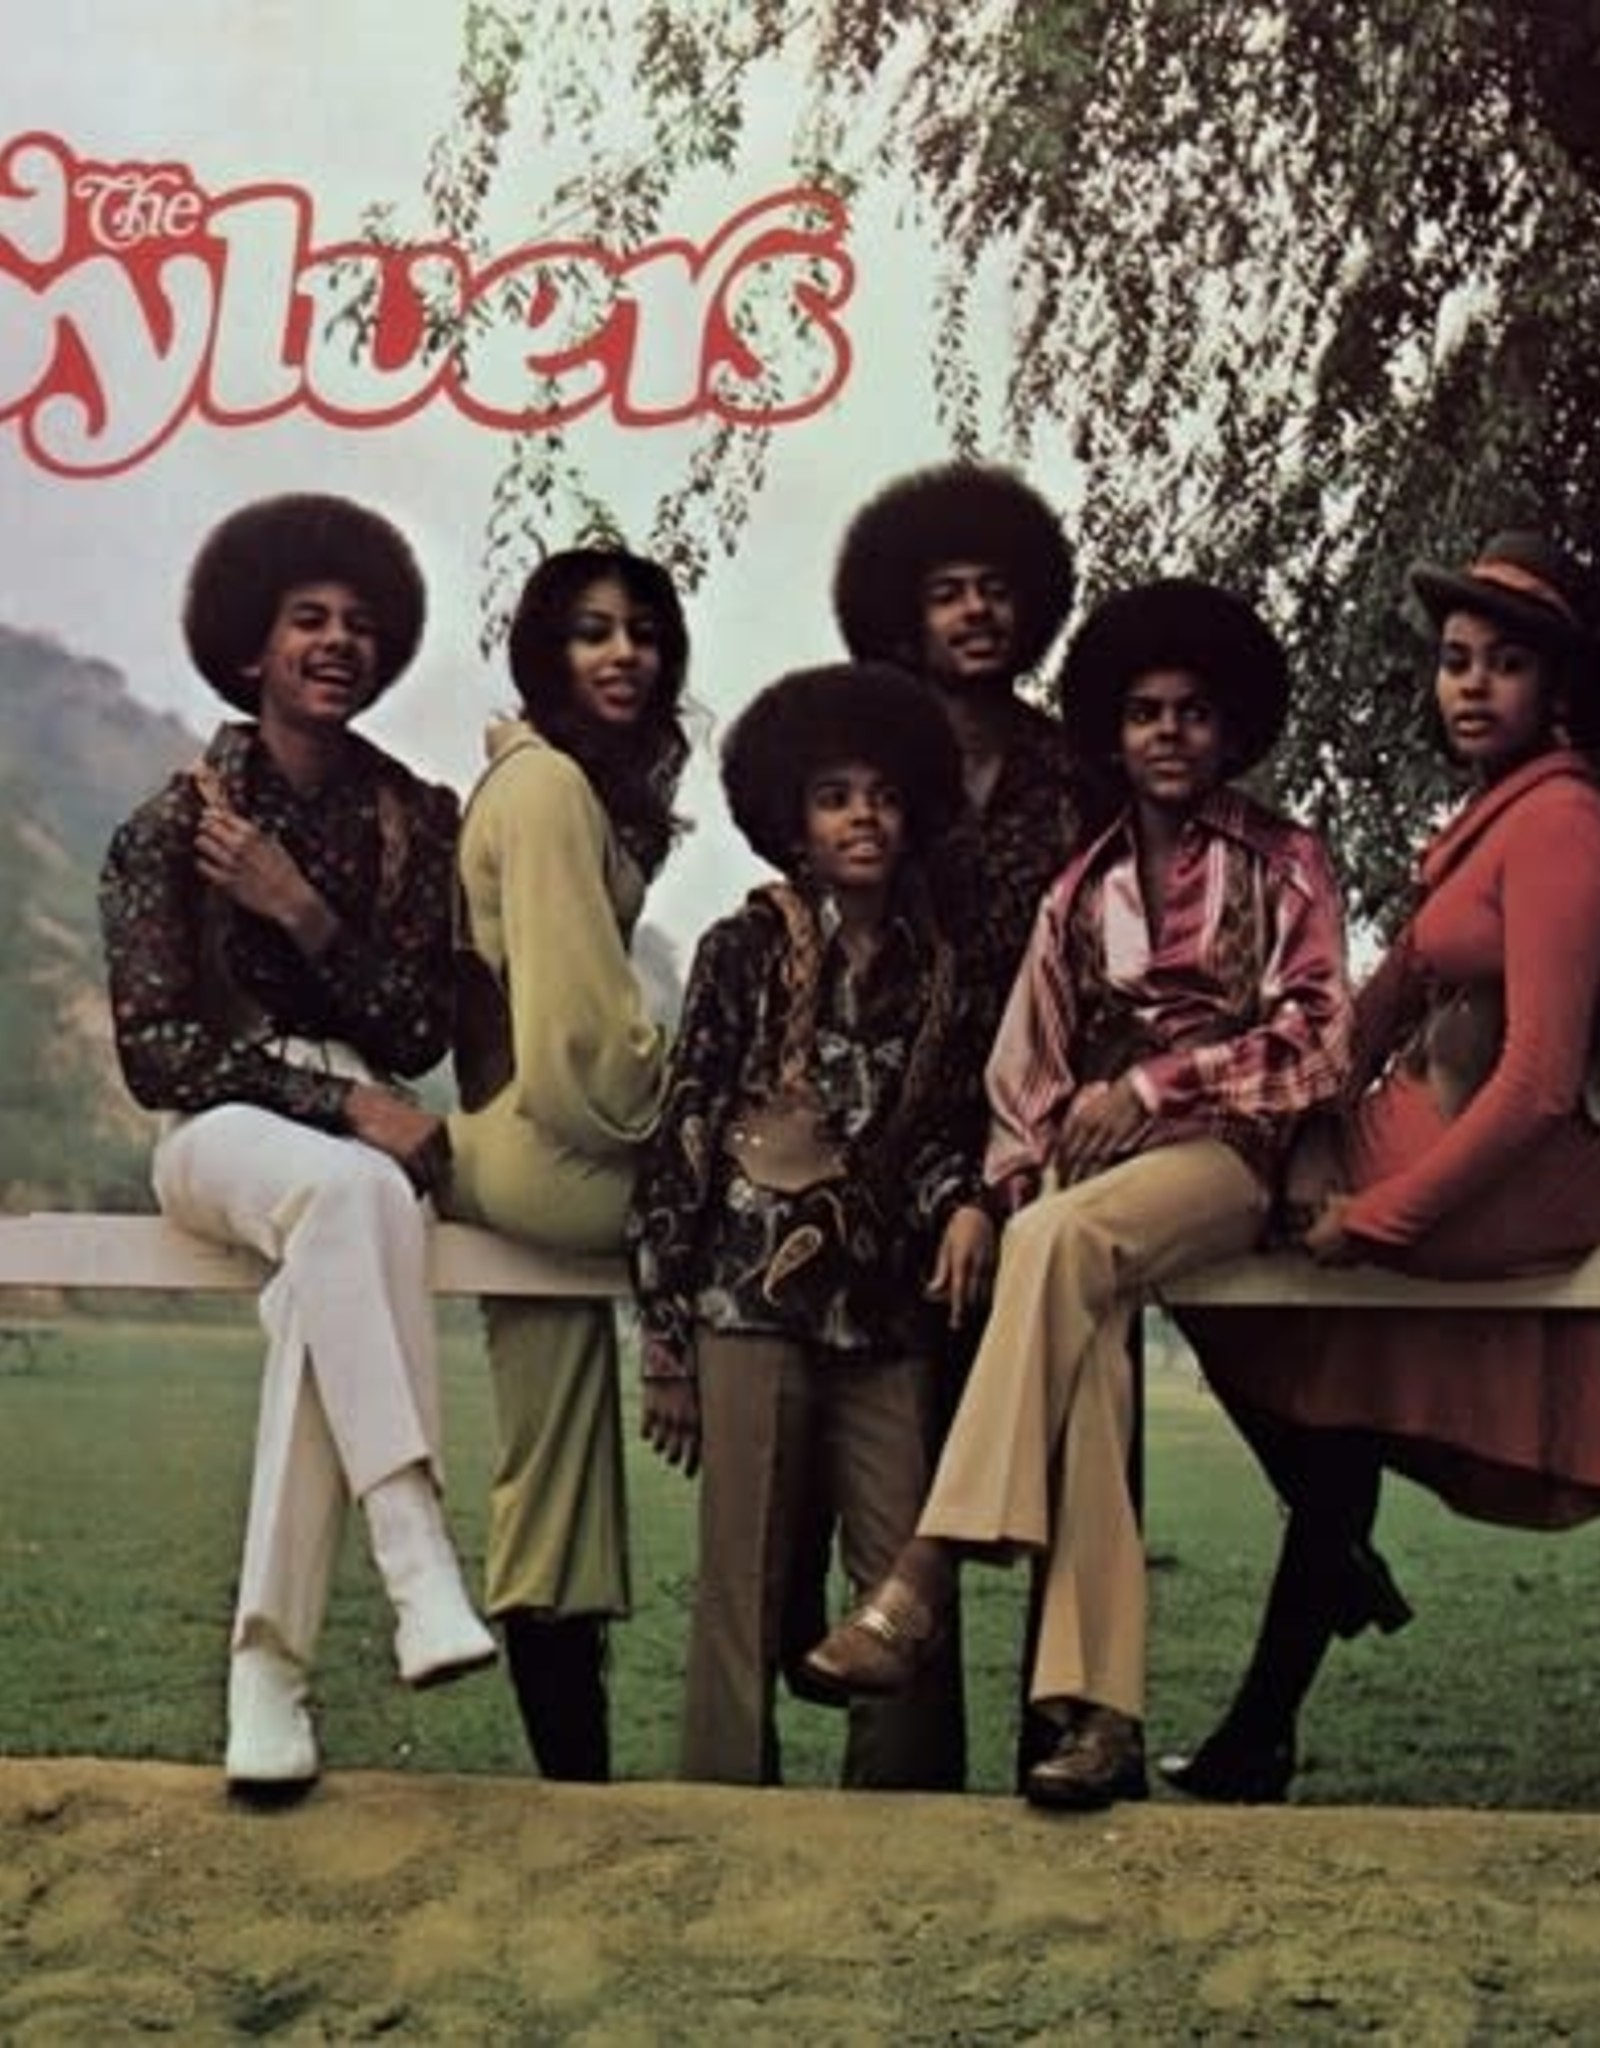 Sylvers - s/t